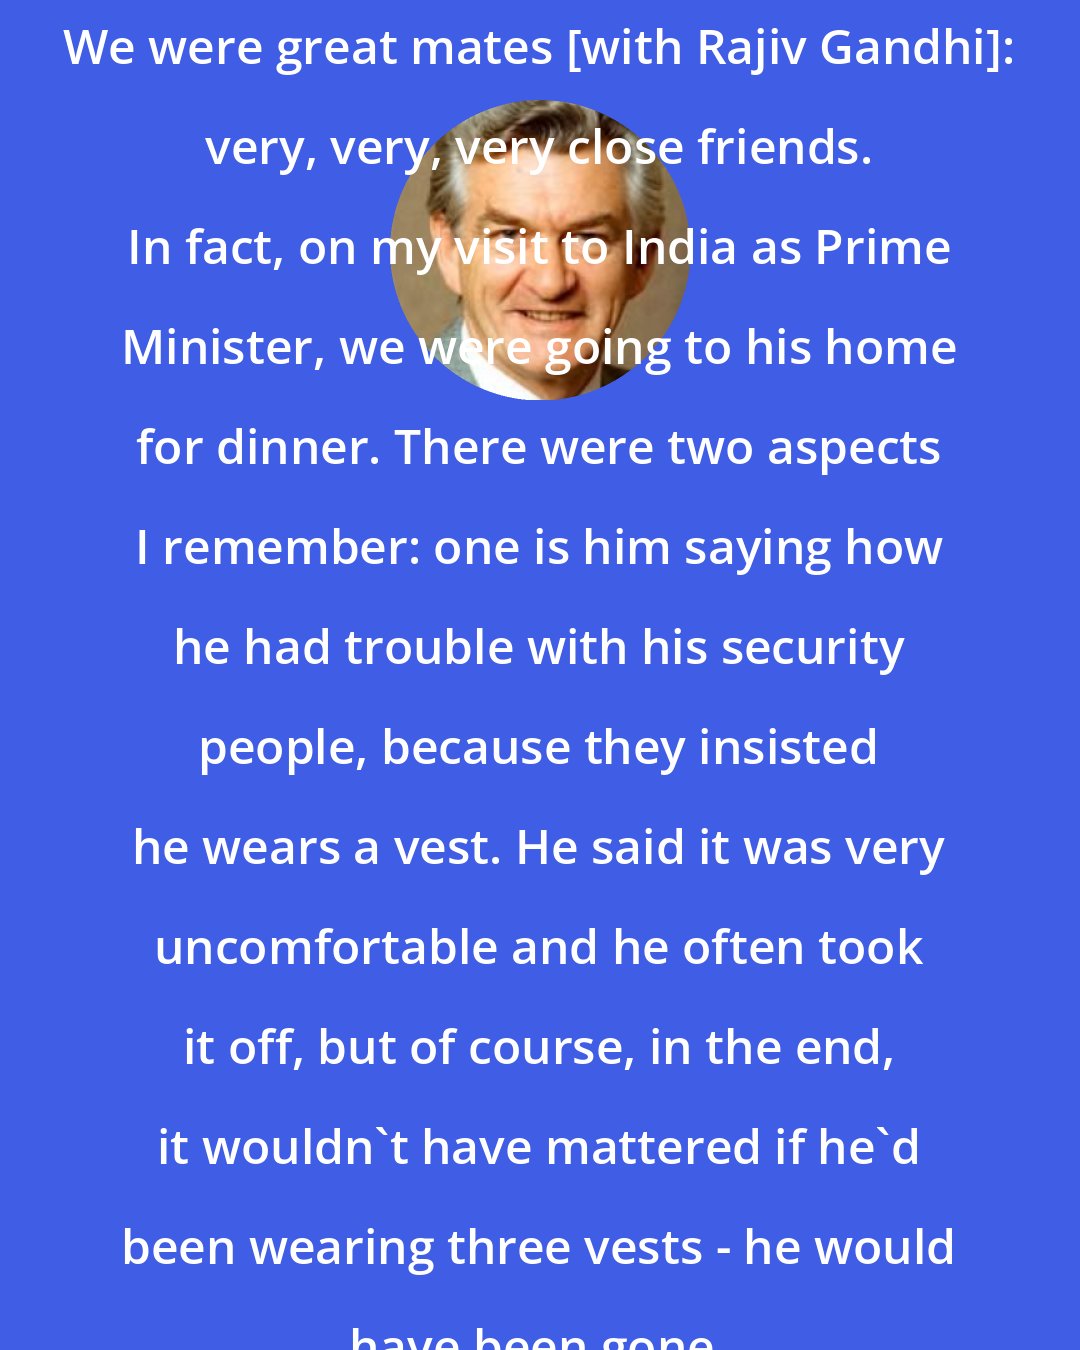 Bob Hawke: We were great mates [with Rajiv Gandhi]: very, very, very close friends. In fact, on my visit to India as Prime Minister, we were going to his home for dinner. There were two aspects I remember: one is him saying how he had trouble with his security people, because they insisted he wears a vest. He said it was very uncomfortable and he often took it off, but of course, in the end, it wouldn't have mattered if he'd been wearing three vests - he would have been gone.